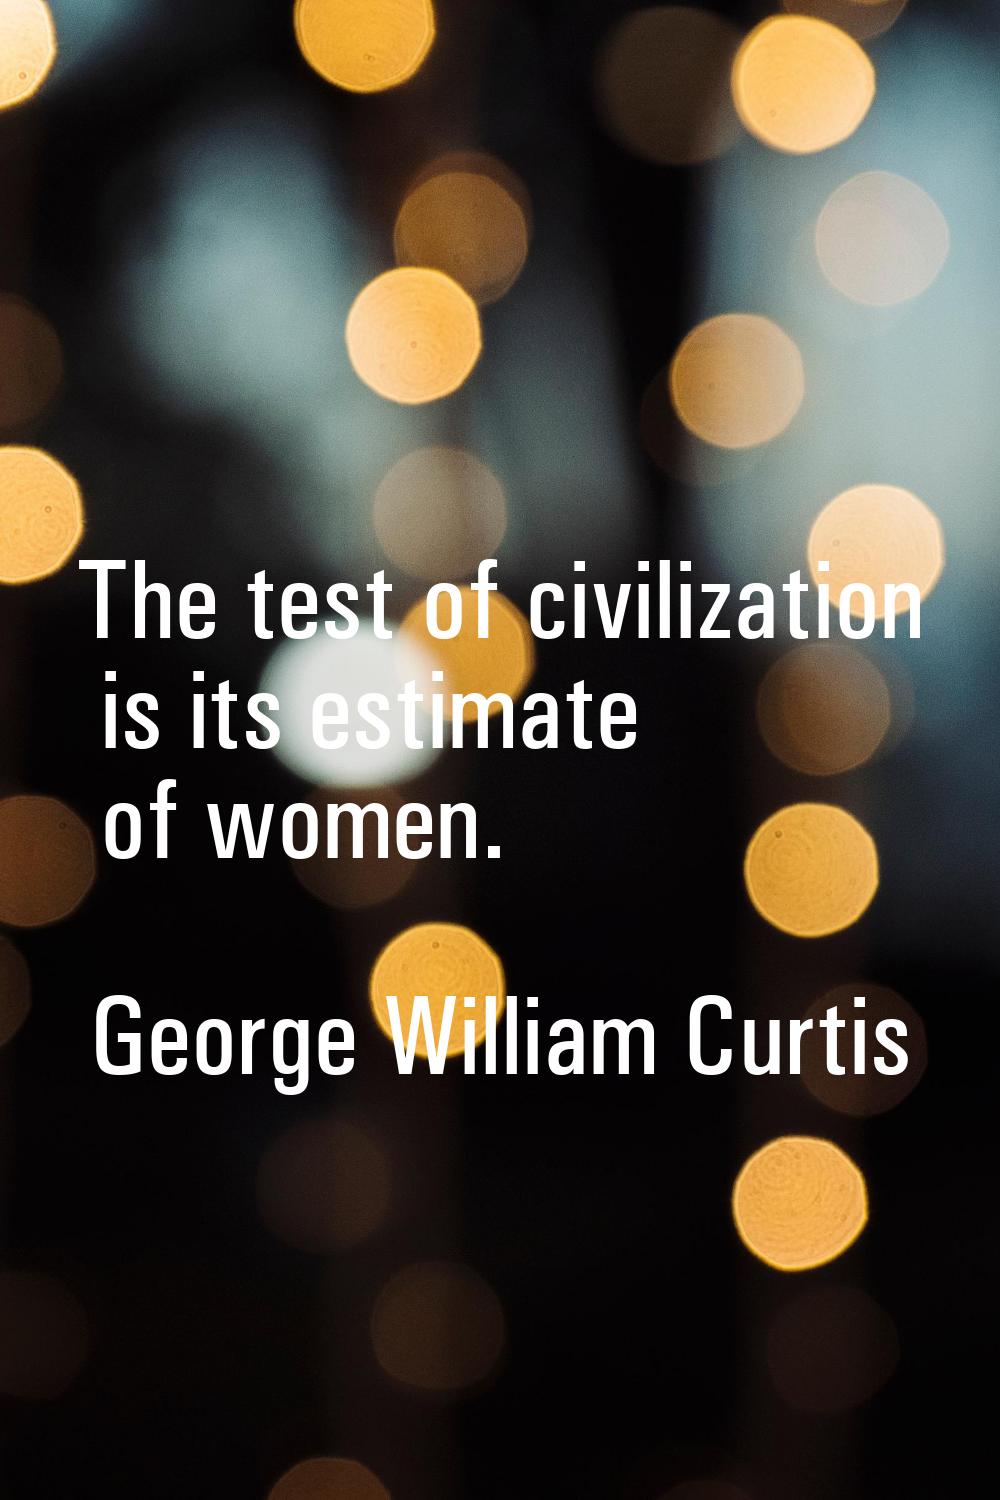 The test of civilization is its estimate of women.